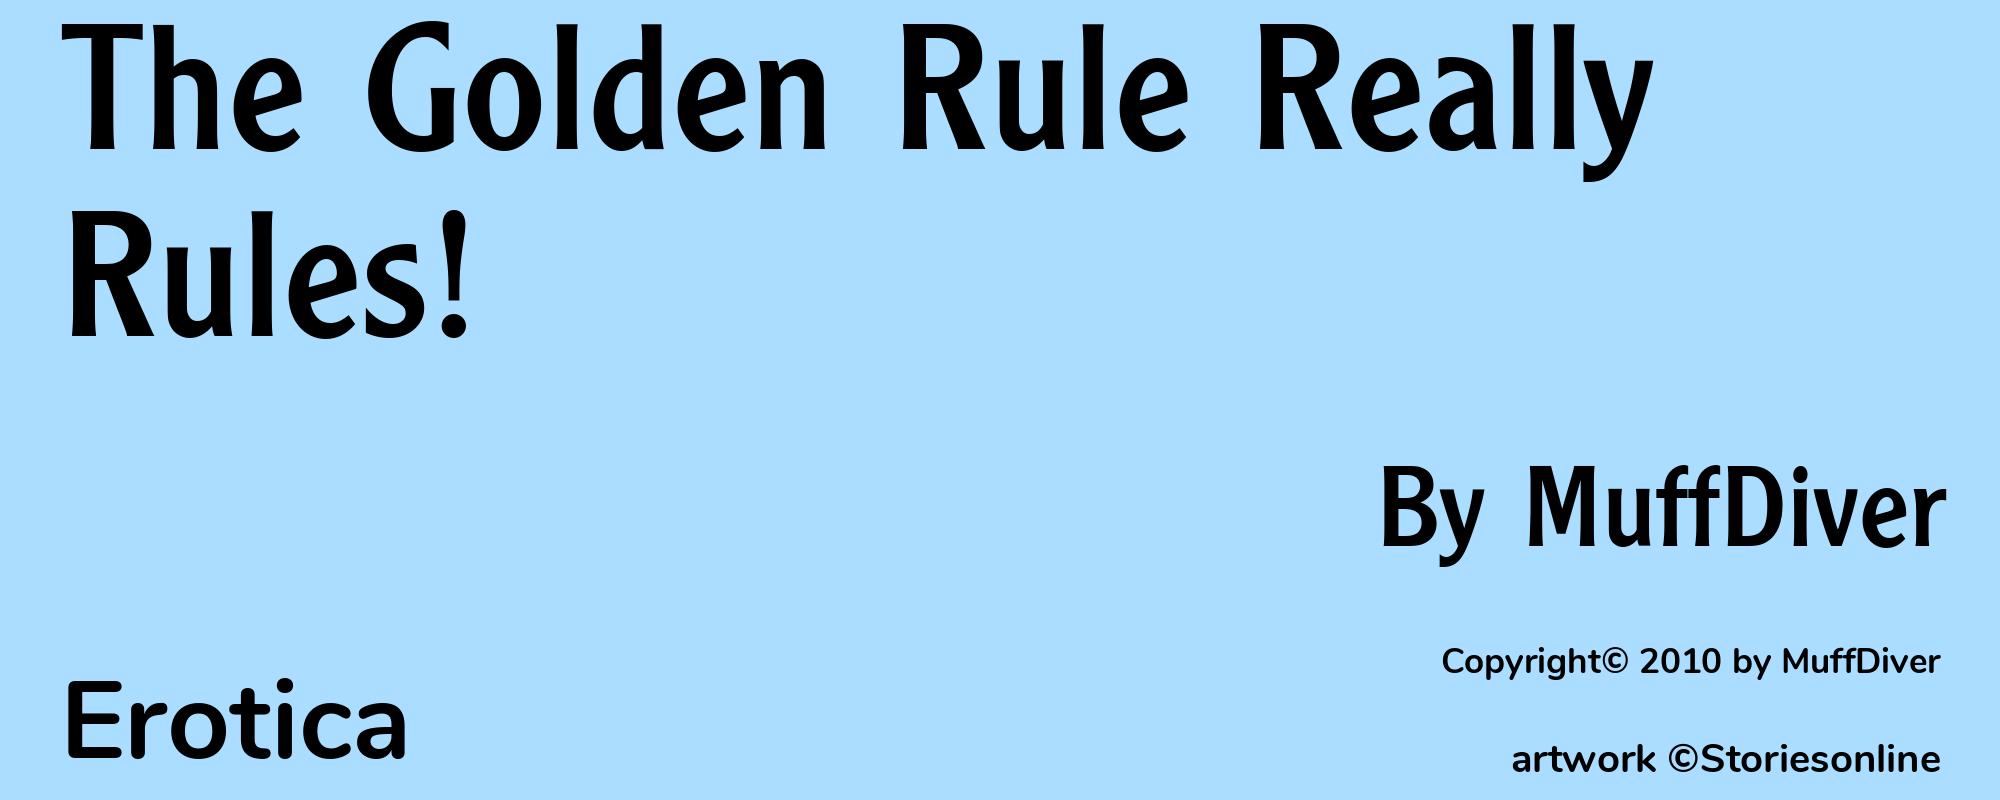 The Golden Rule Really Rules! - Cover